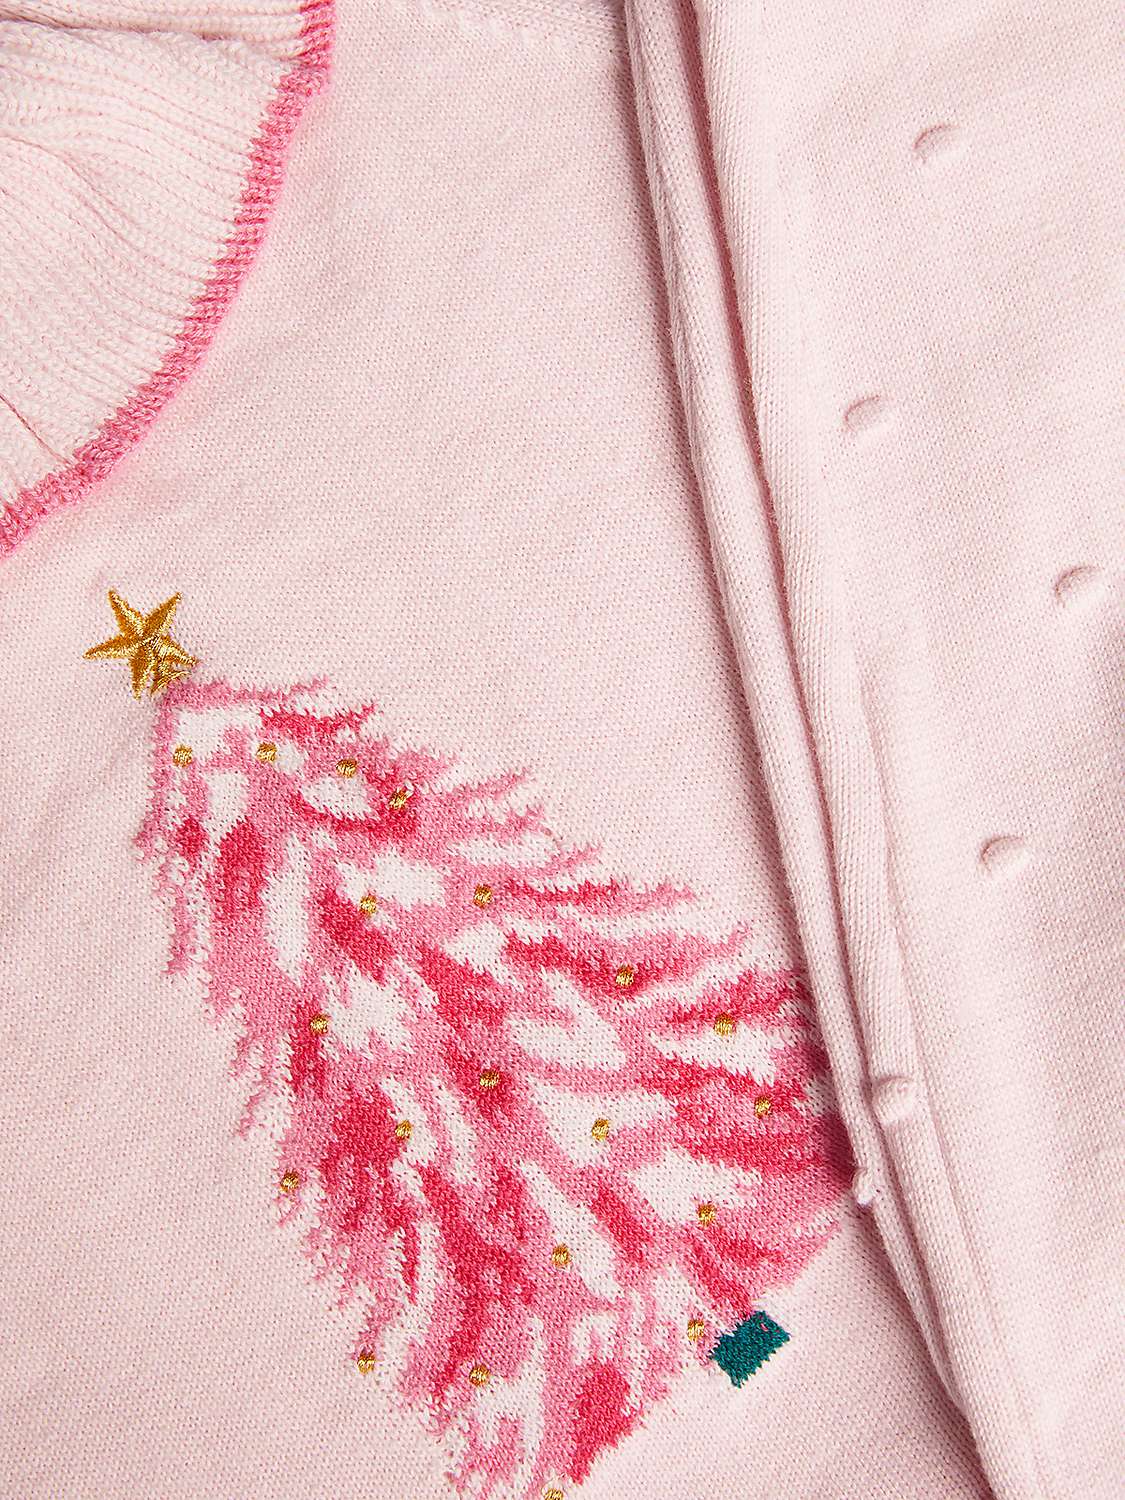 Buy Monsoon Baby Christmas Tree Knitted Top & Trousers Set Online at johnlewis.com